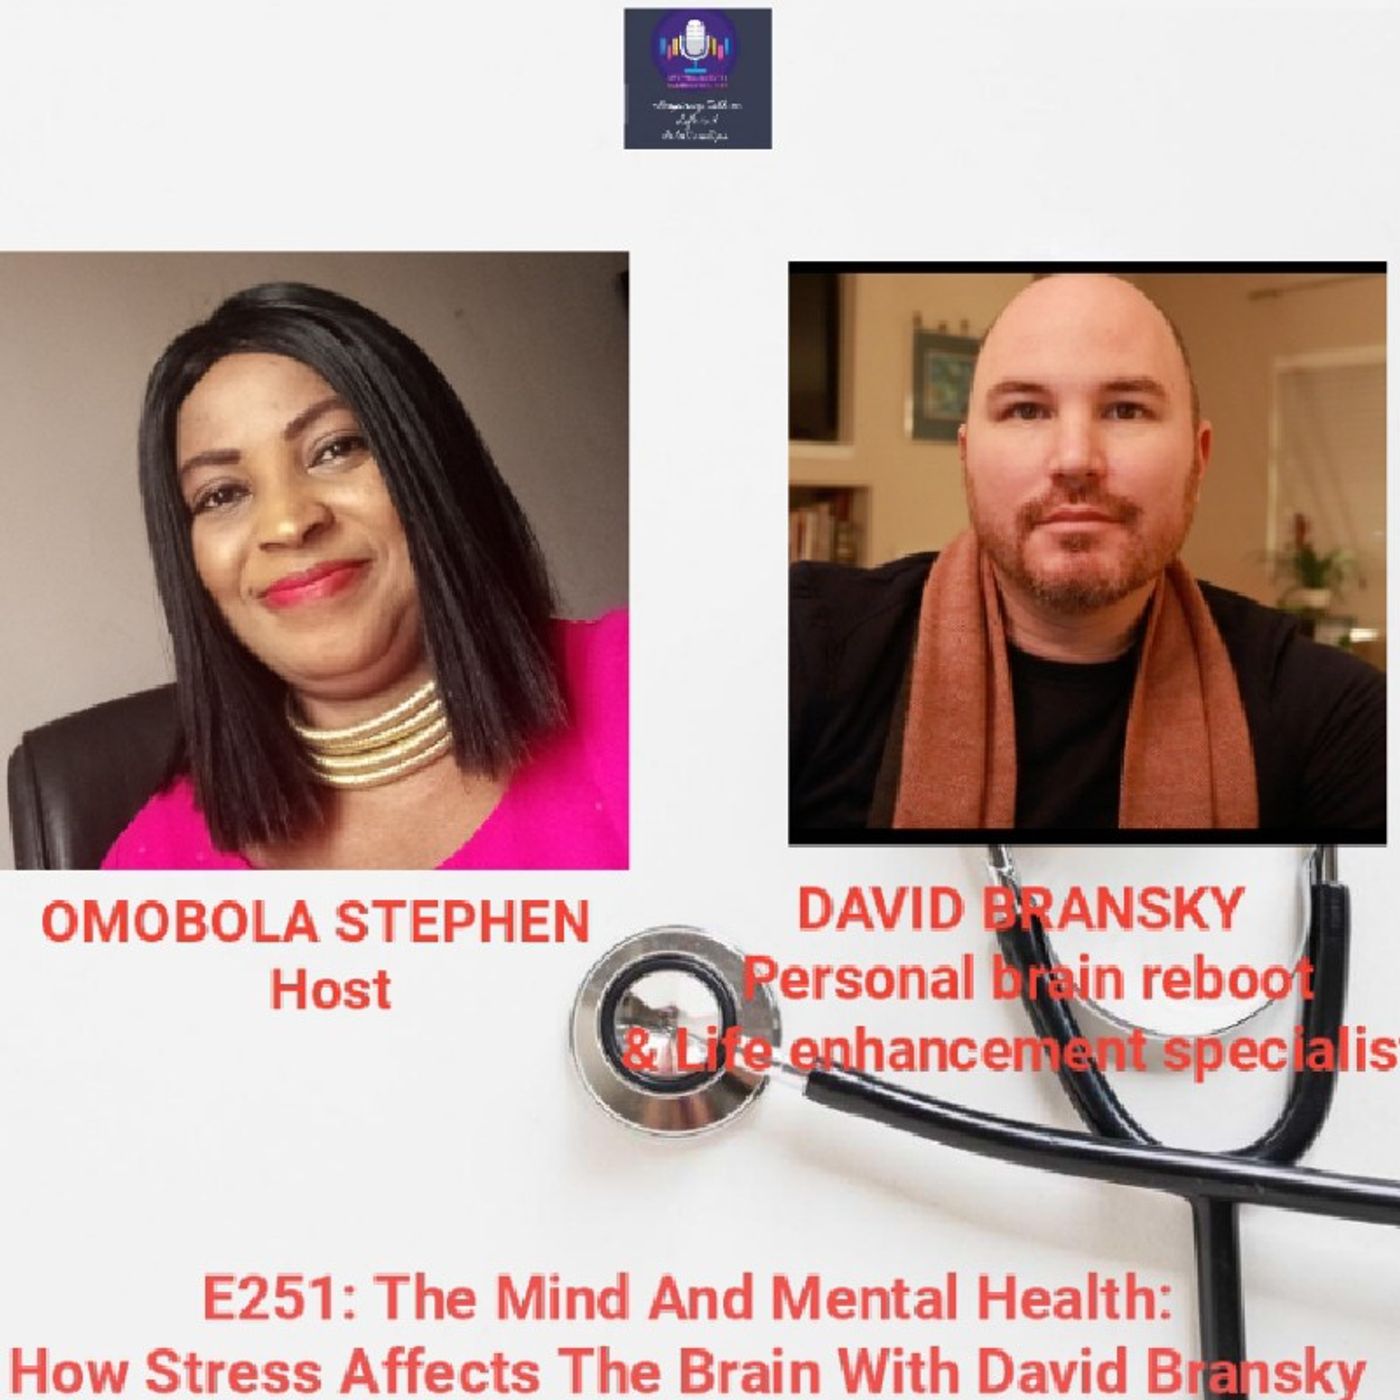 E251:The Mind And Mental Health: How Stress Affects The Brain With David Bransky